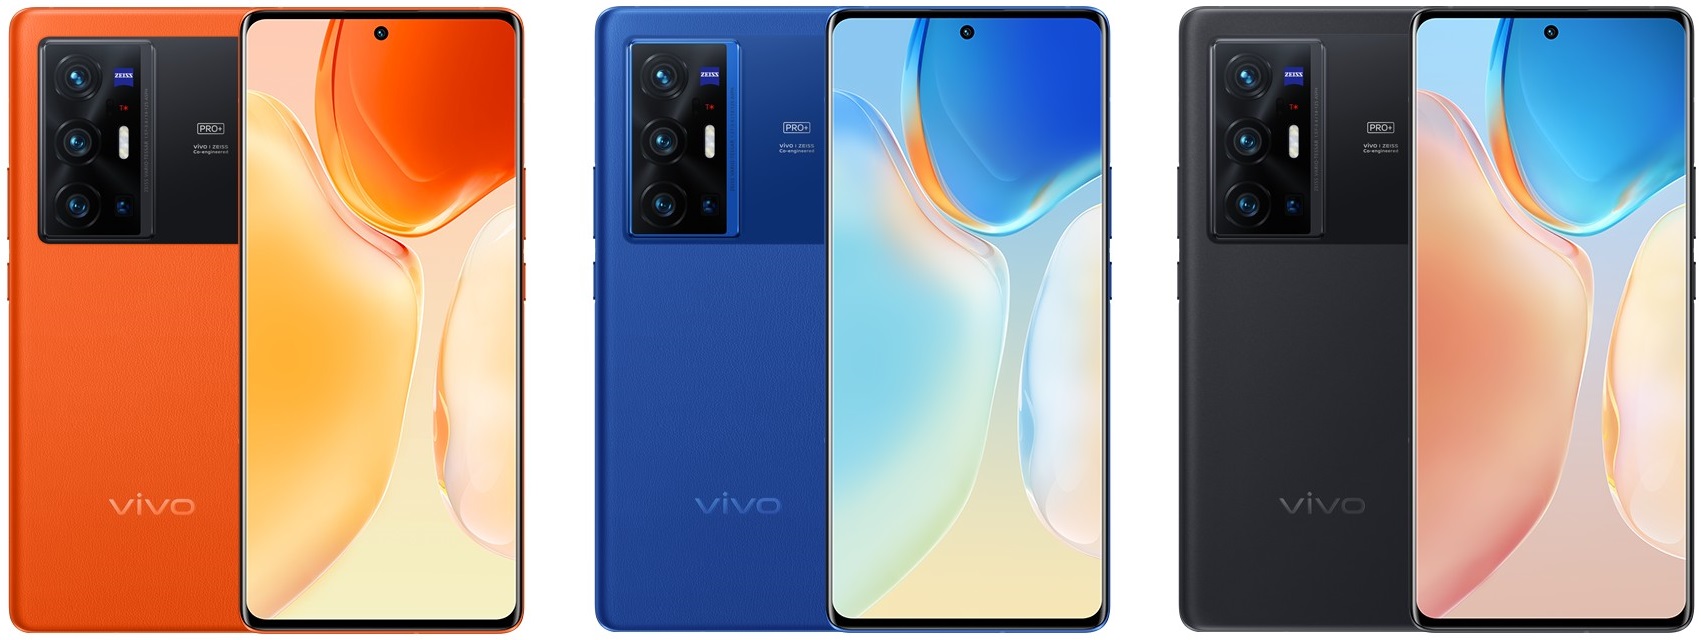 Vivo X70 Pro+ - Snapdragon 888+, Samsung E5 screen, Quad camera, IP68, big battery and up to 512GB of storage priced from $850